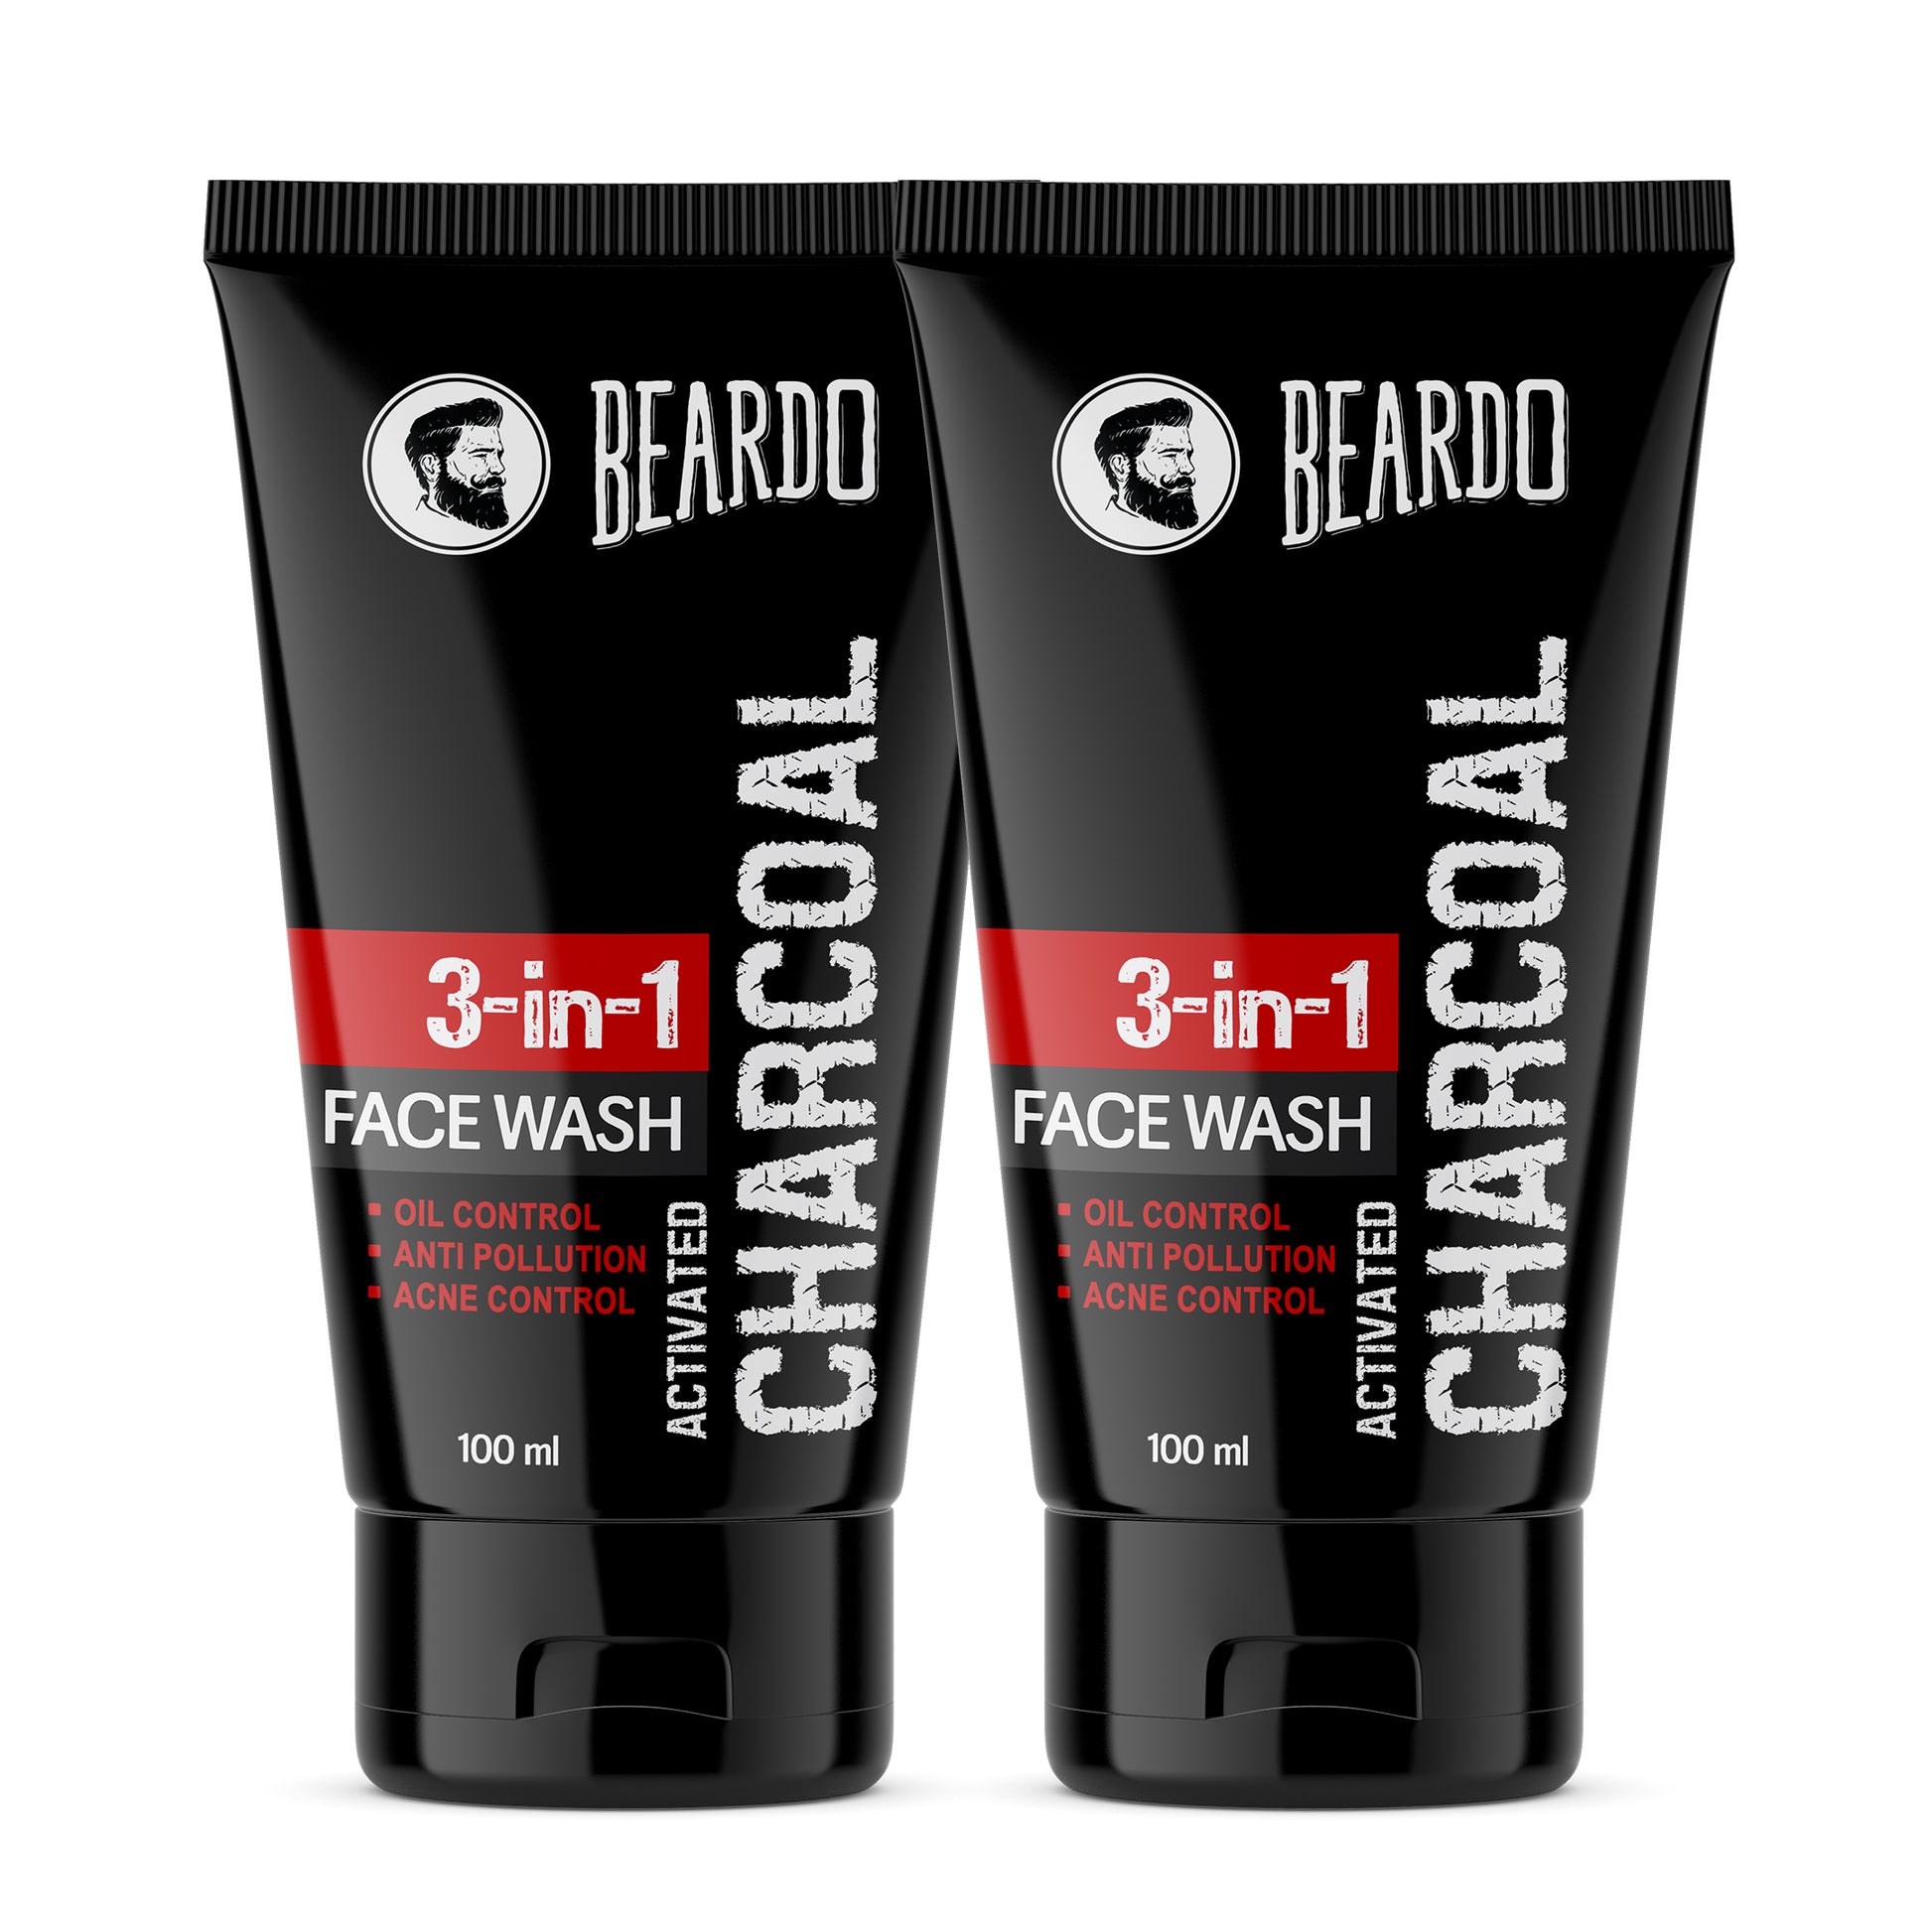 Activated charcoal facewash pack of 2